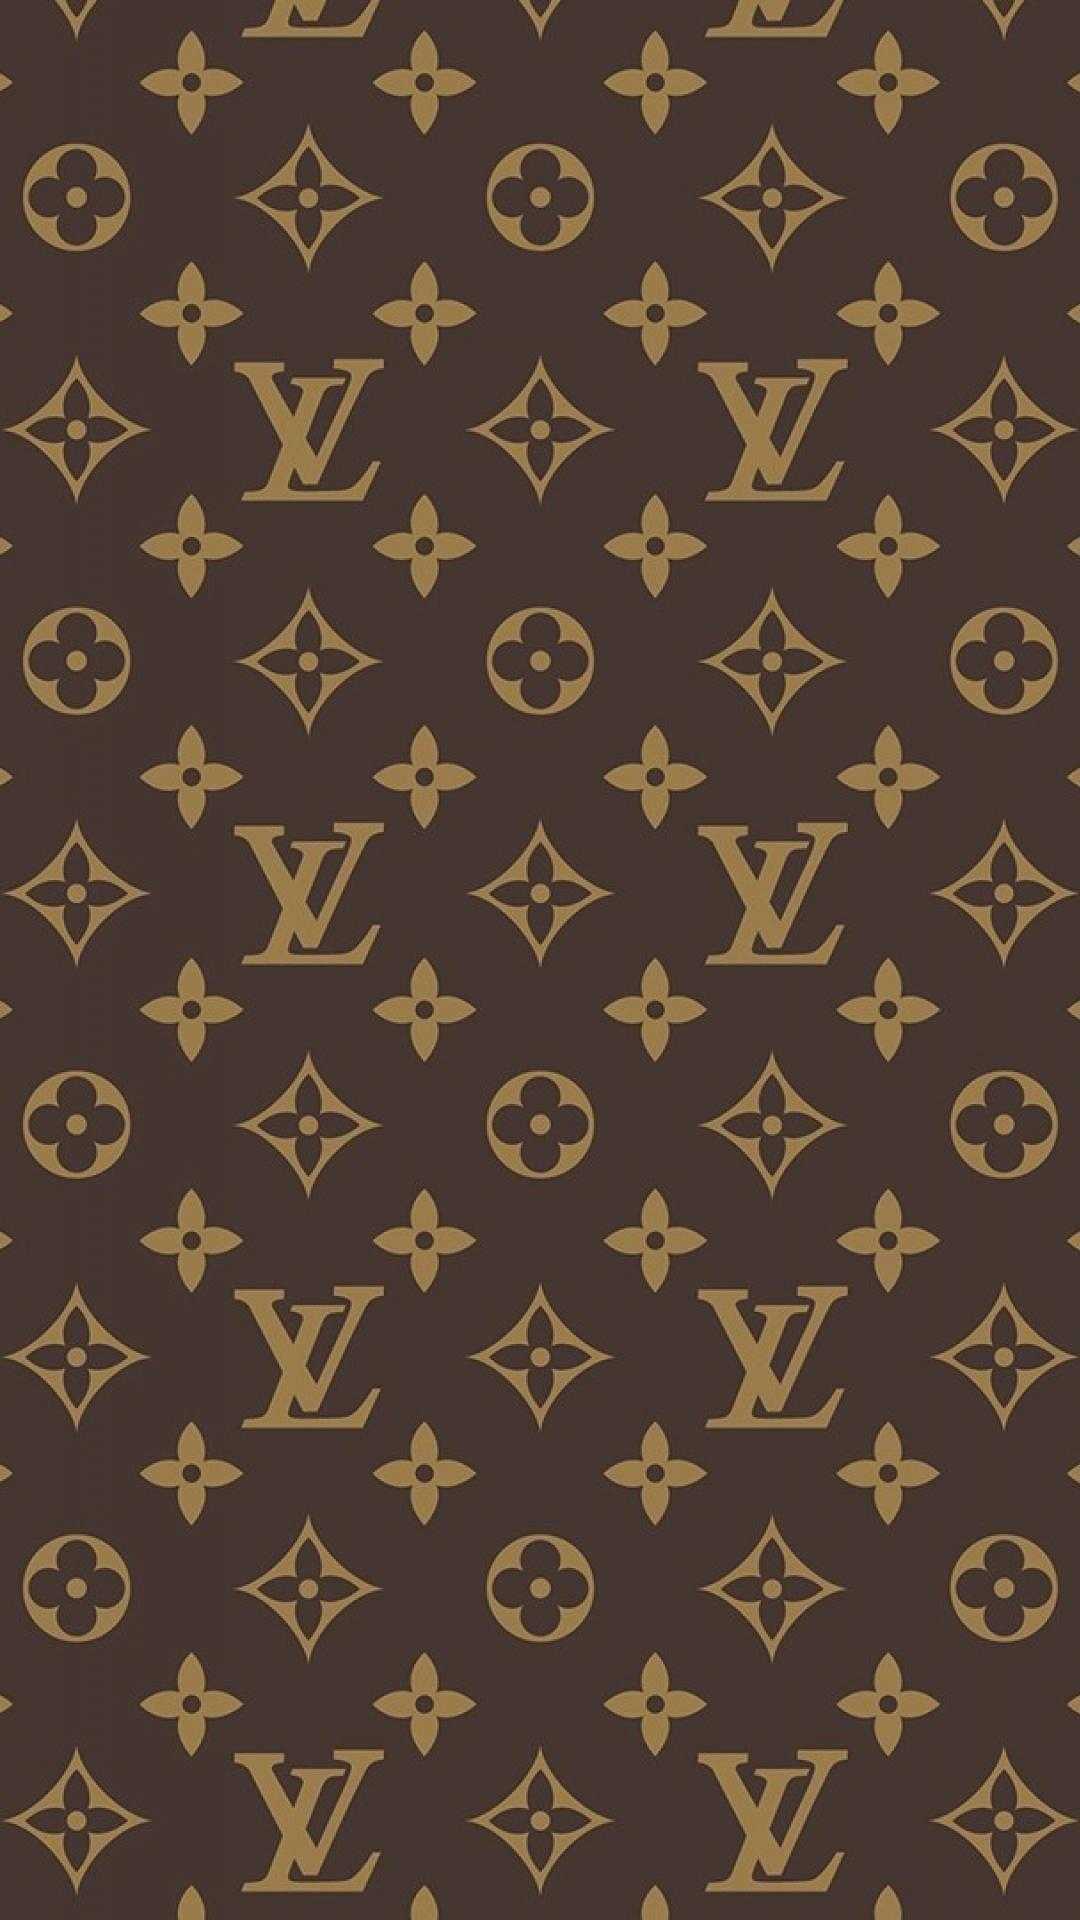 Background Louis Vuitton Wallpaper Discover more Accessories